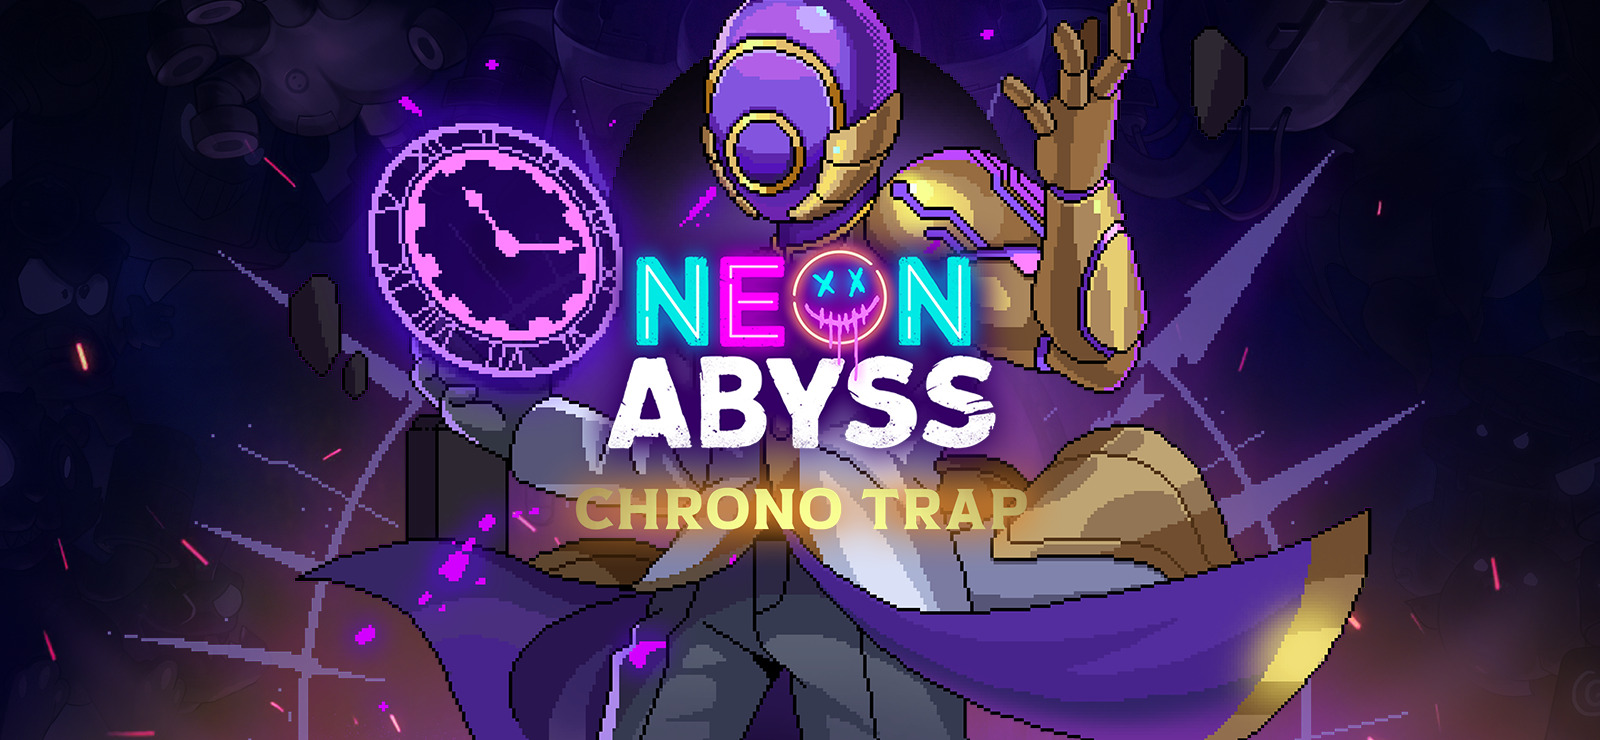 Neon abyss steam фото 19